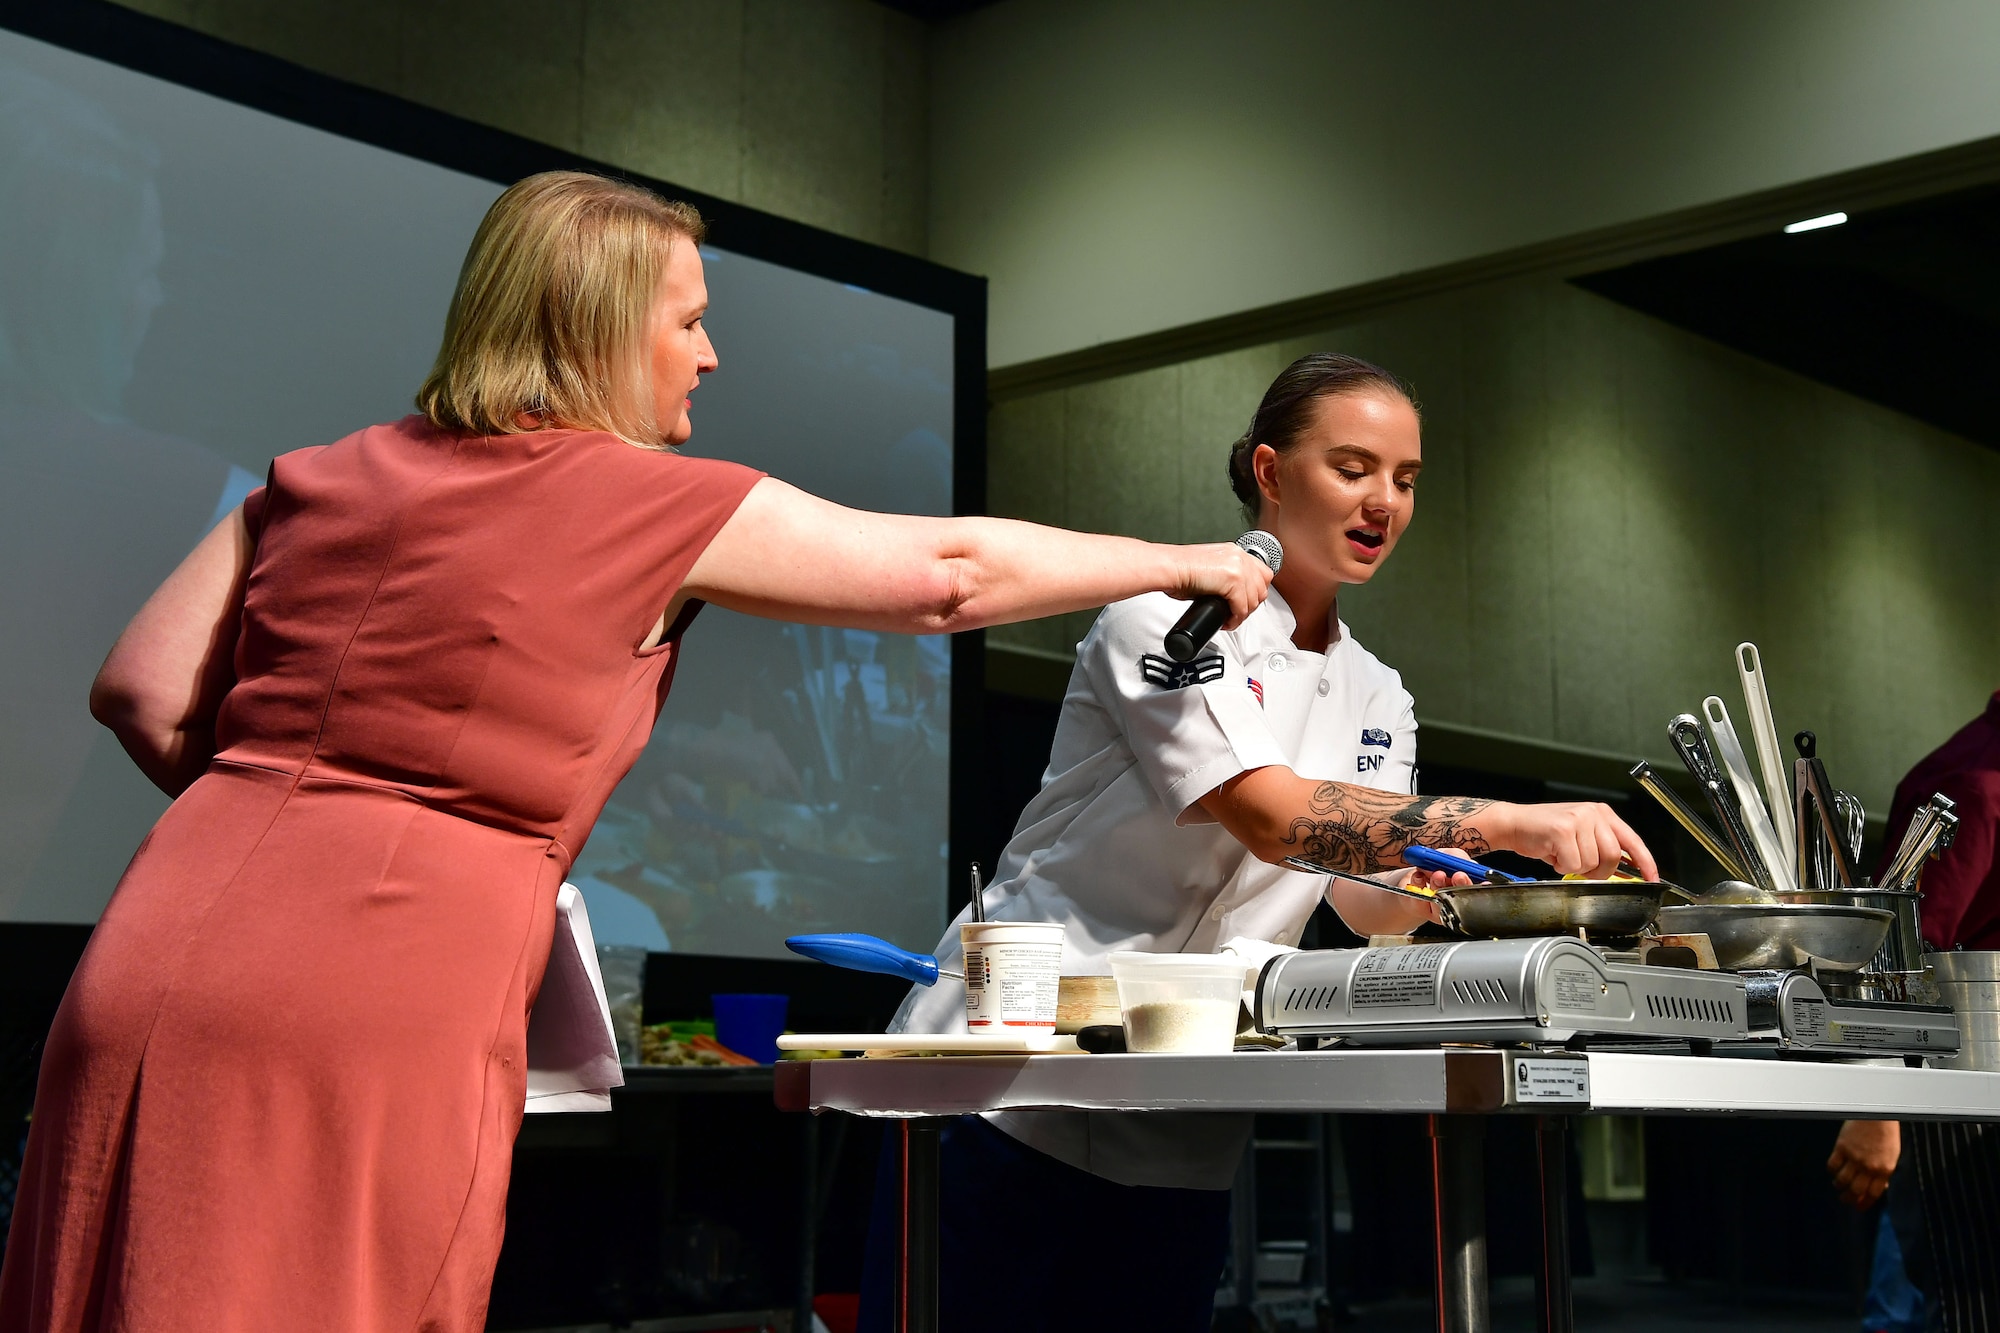 An Airman answers questions from the announcer during the Iron Chef Championship competition.